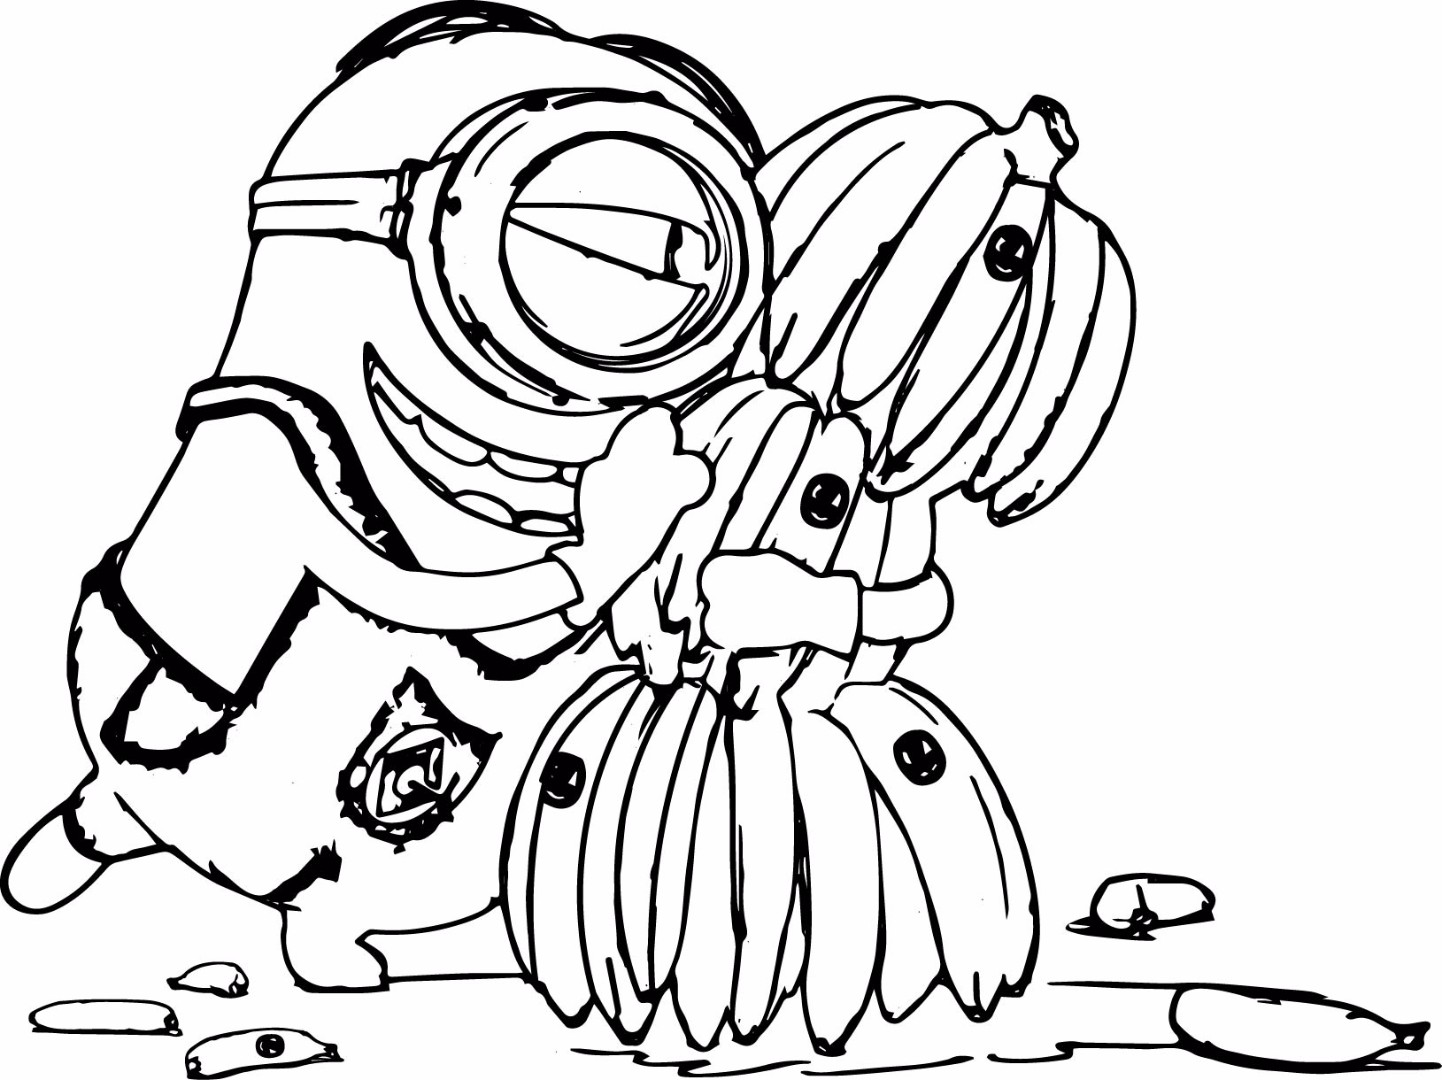 Download 233+ Super Mario Minions Coloring Pages PNG PDF File